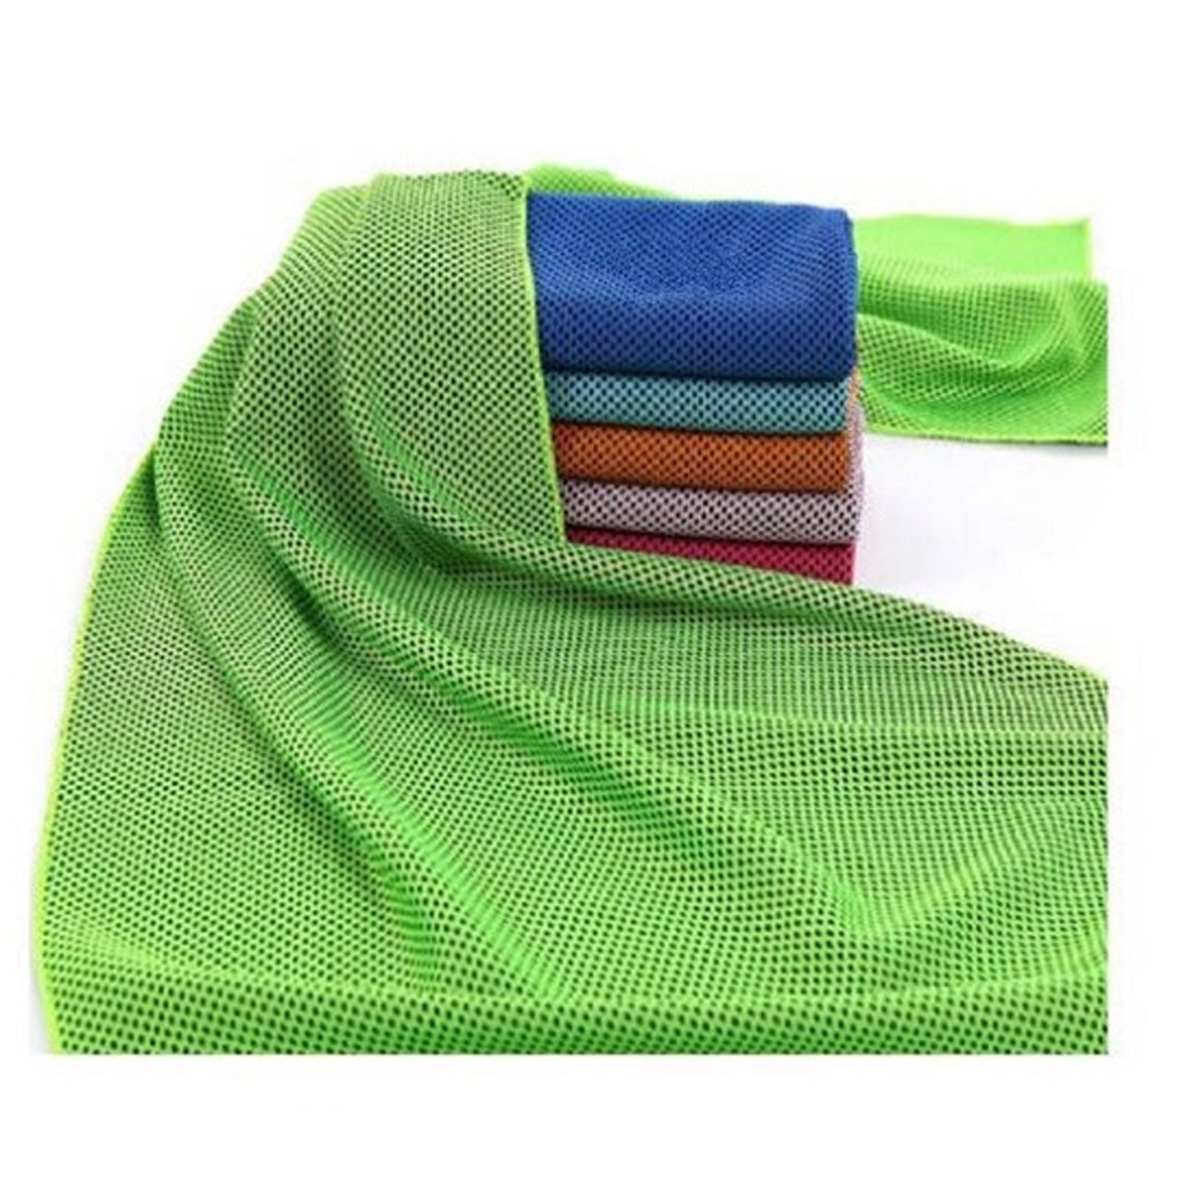 GL-ELY1075 Sports Cooling Towel